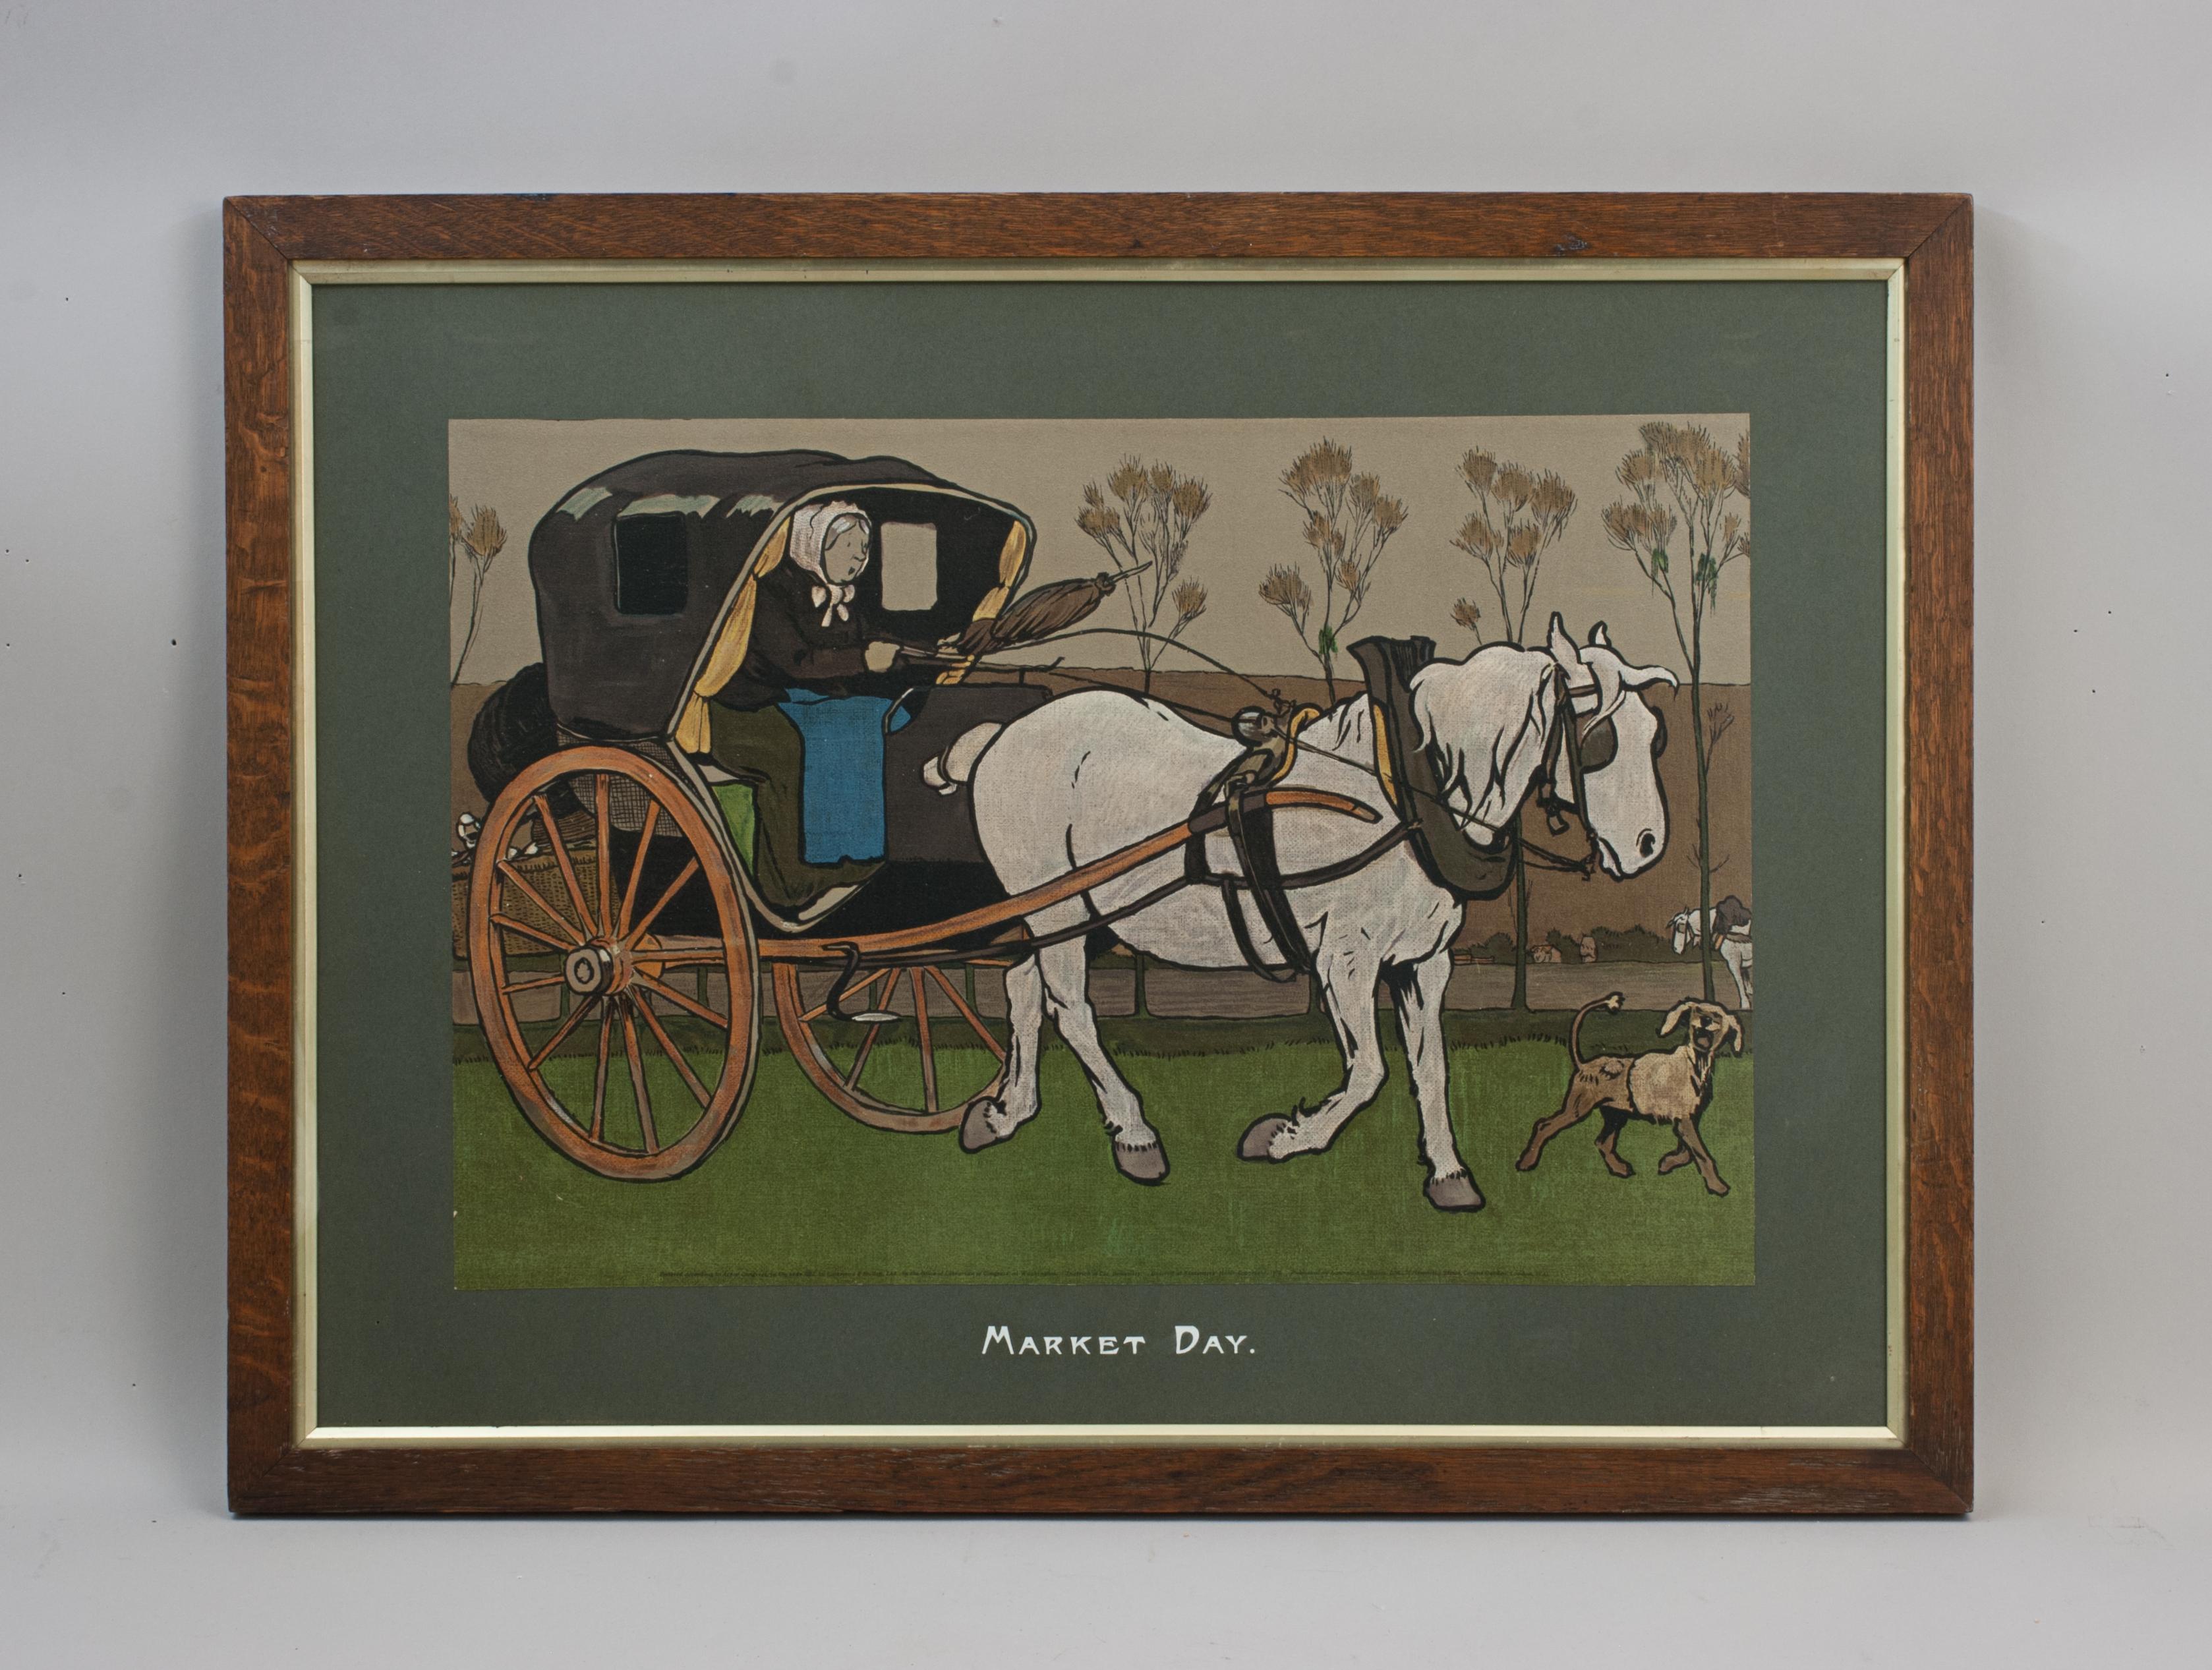 Cecil Aldin, Market Day.
A good single chromolithograph depicting a lady in a carriage being pulled by a single horse. Framed in an old oak frame and published by Lawrence & Bullen Ltd. Print details:- Entered according to Act of Congress, in the